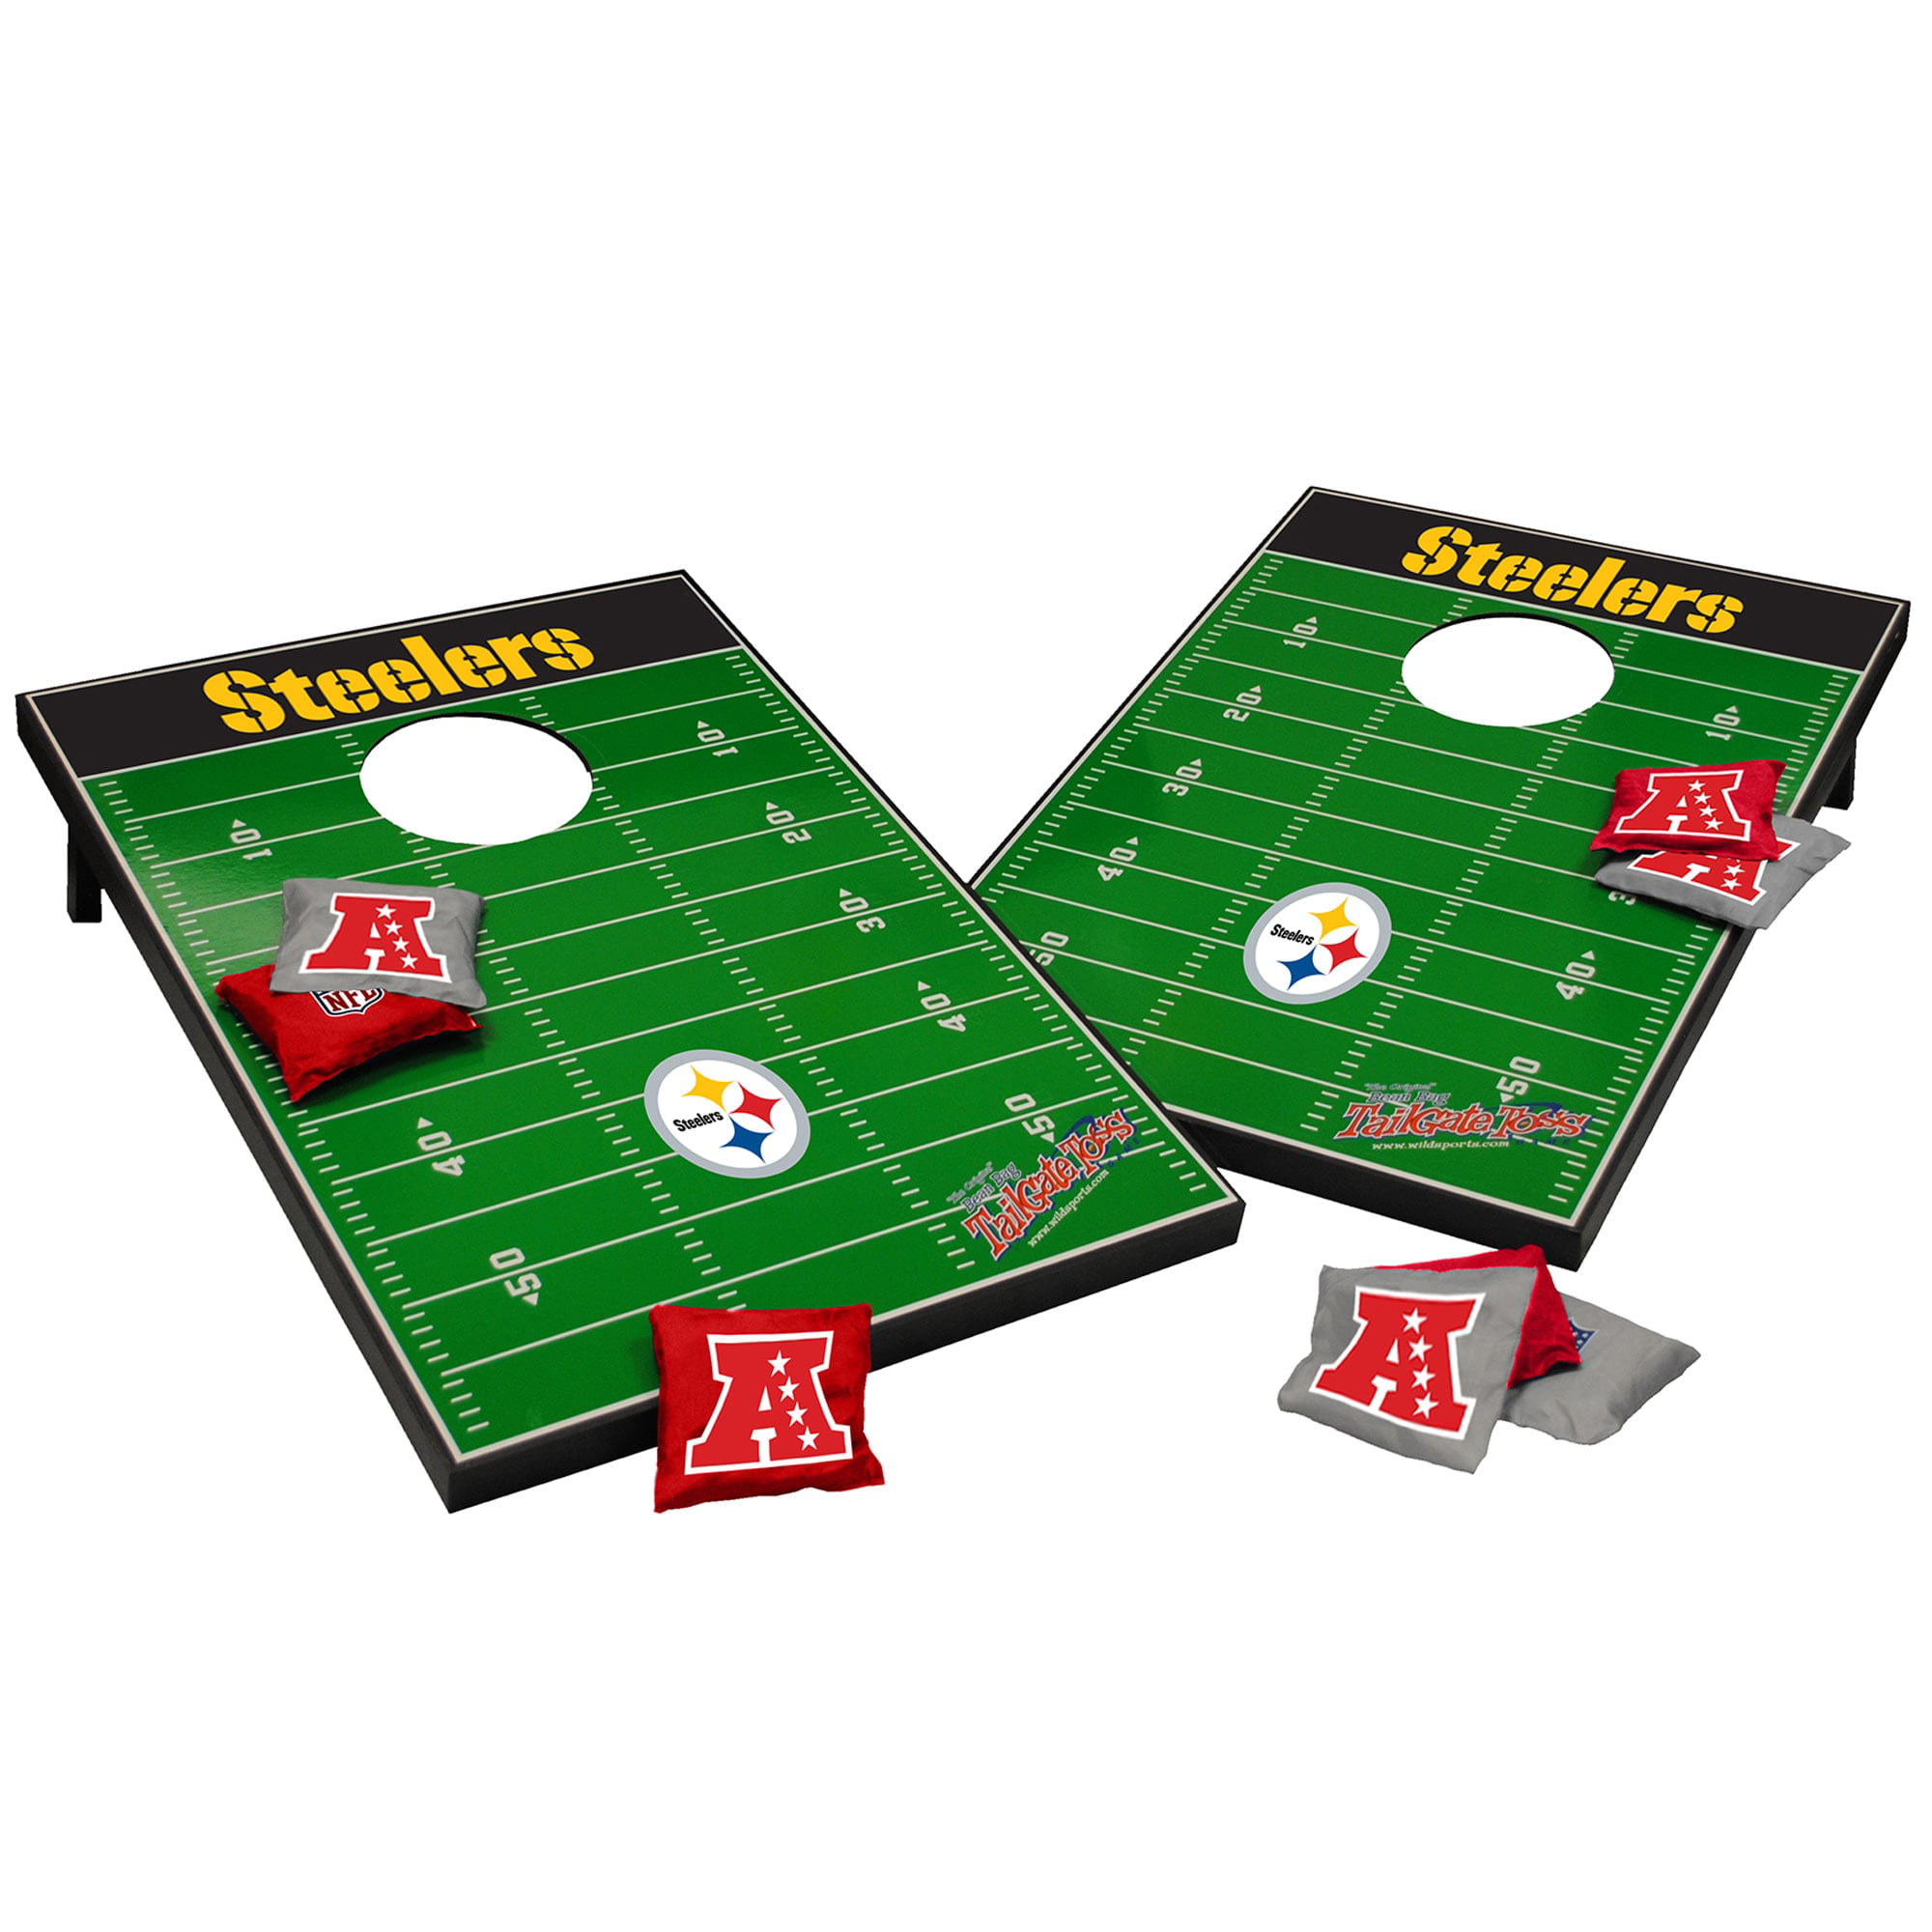 Bulldogs Sports Cornhole Board Decals Stickers 03 Wedding Tailgating Camping Games Do It Yourself Designs Custom Corn Toss